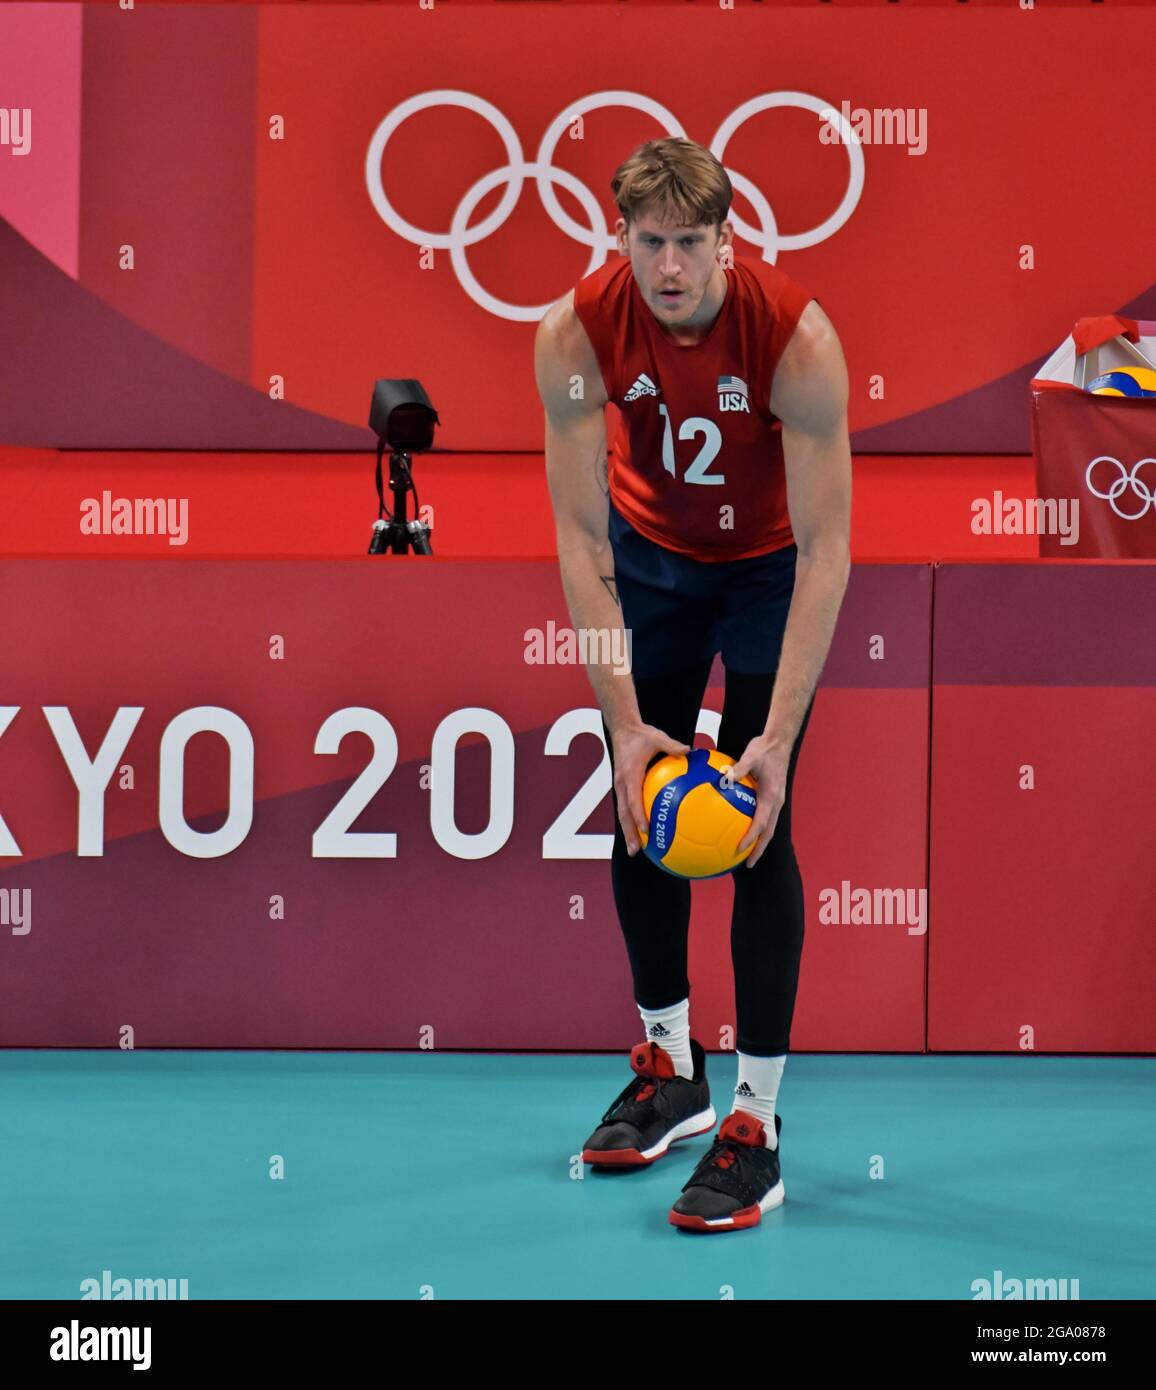 Tokyo, Japan. 28th July, 2021. USA's Maxwell Holt serves the ball in the  preliminary round during the Tokyo Olympics Men's Volleyball at Ariake  Arena on Wednesday, July 28, 2021. Photo by Keizo